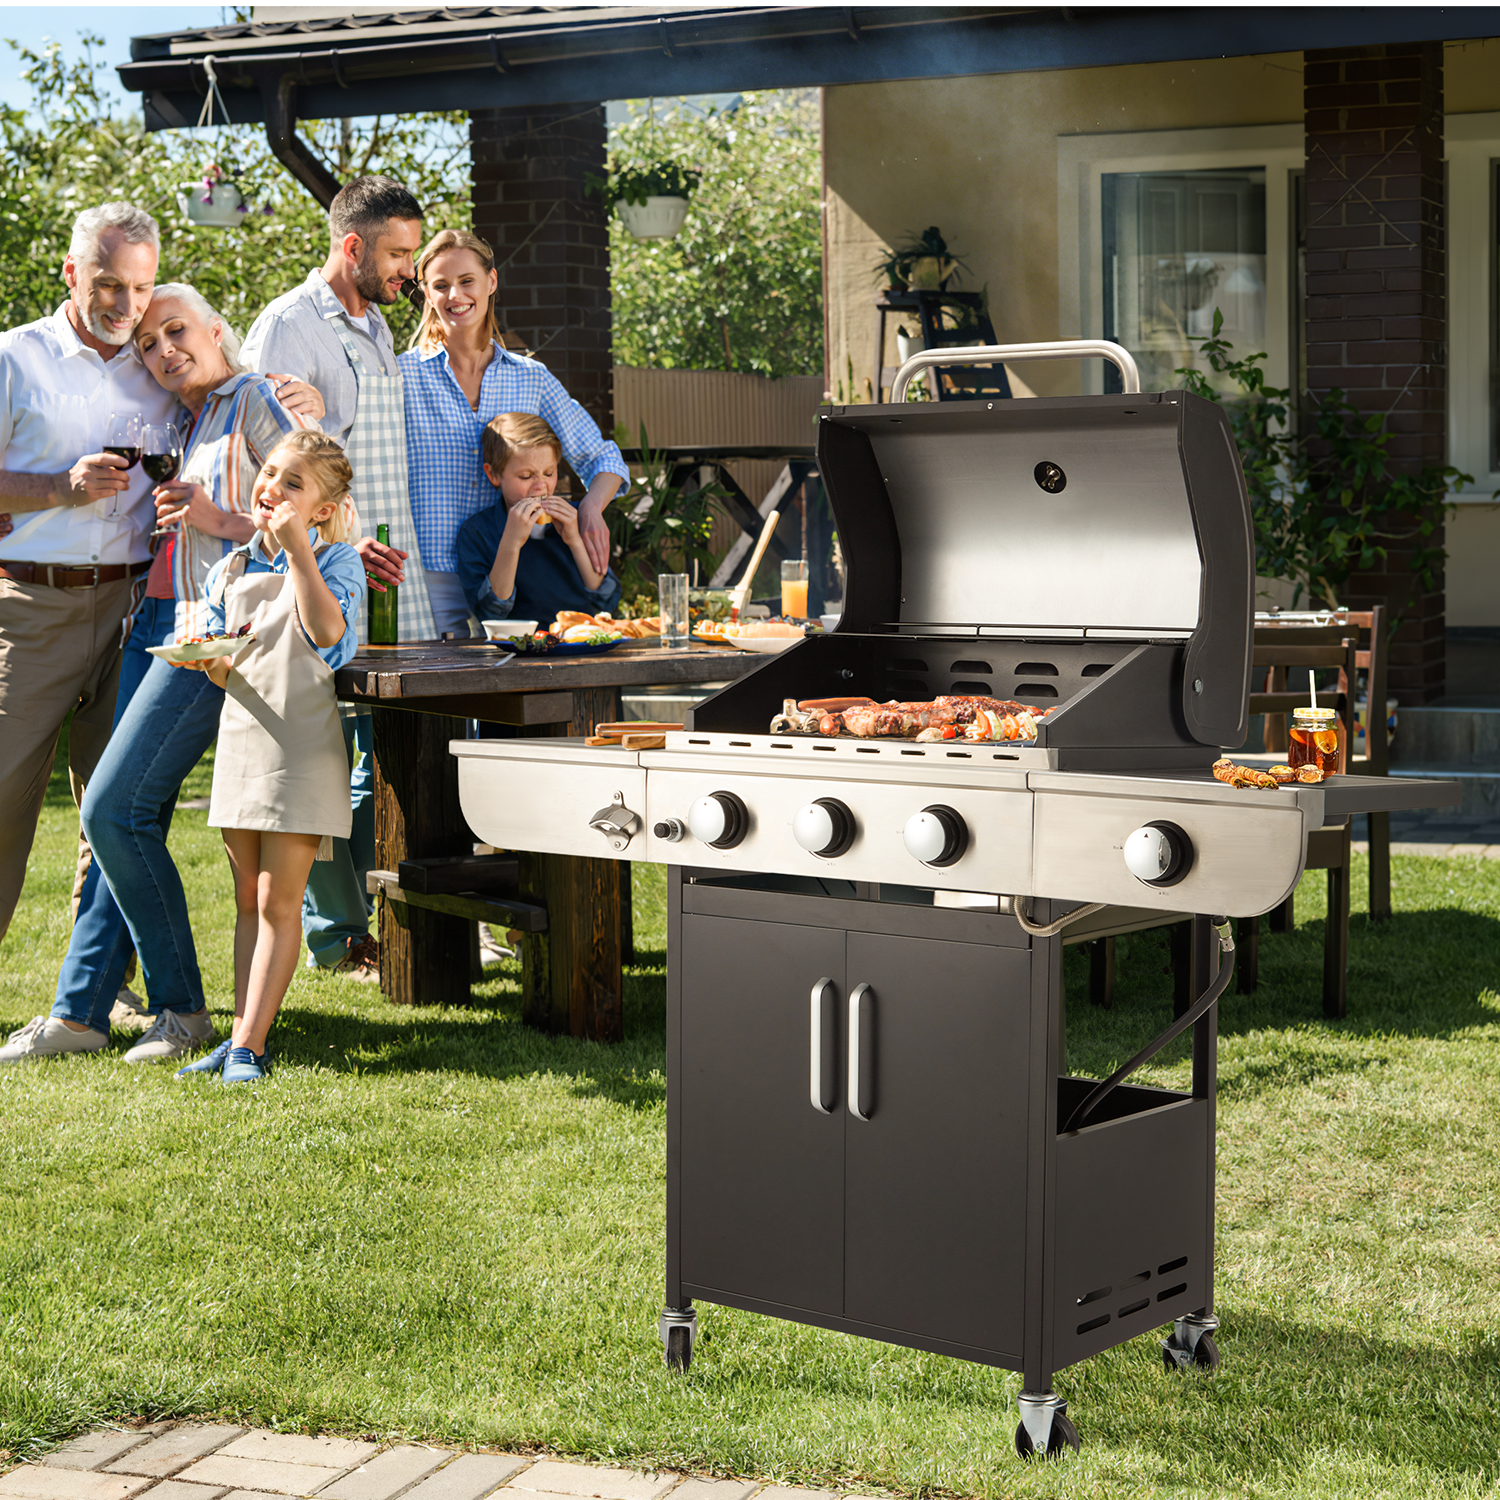 3 Burner Gas Grill,24,000 BTU Propane Grill with Stove and Side Table Patio Garden - Walmart.com